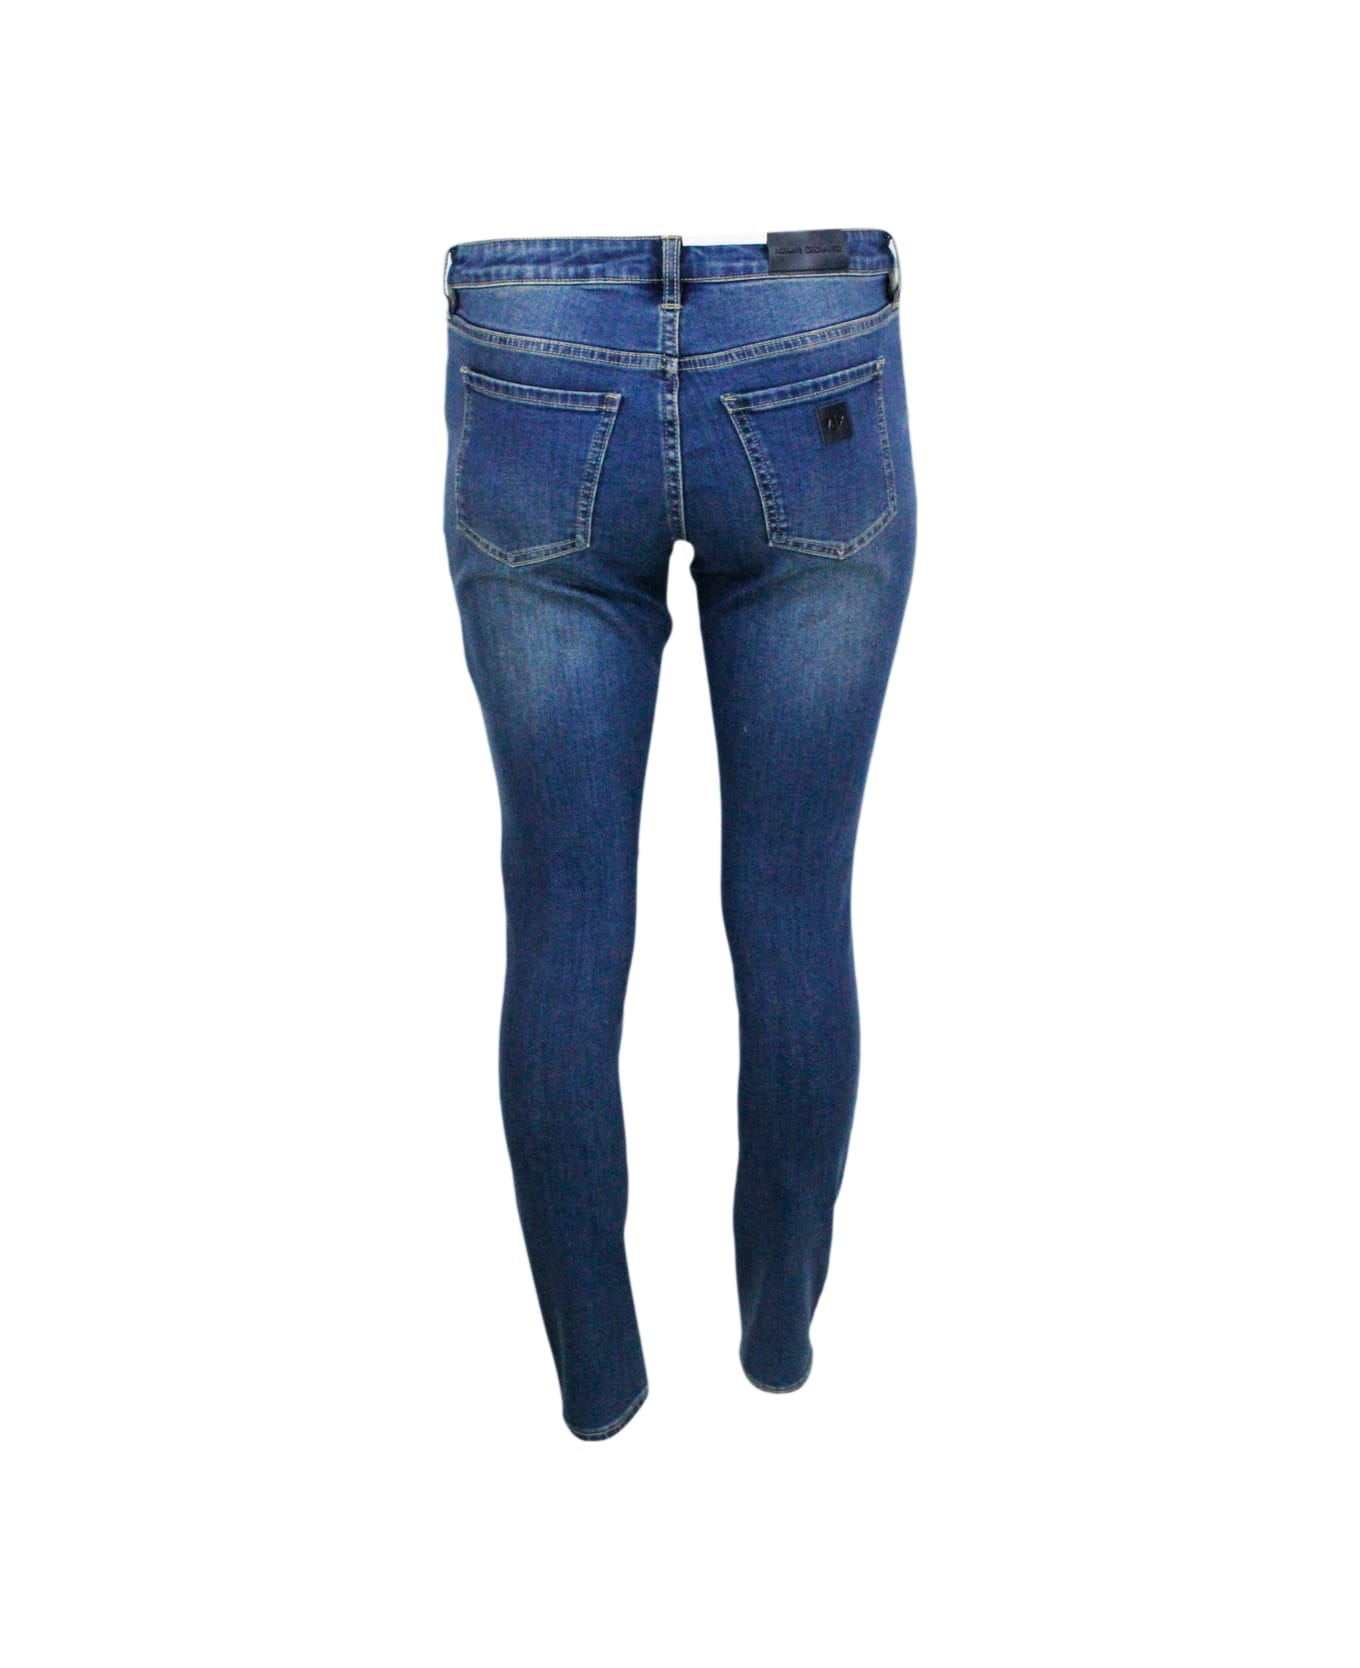 Armani Collezioni Super Skynny Mid Rise Jeans Trousers In sleeves Denim With Logo On The Back Pocket - Denim